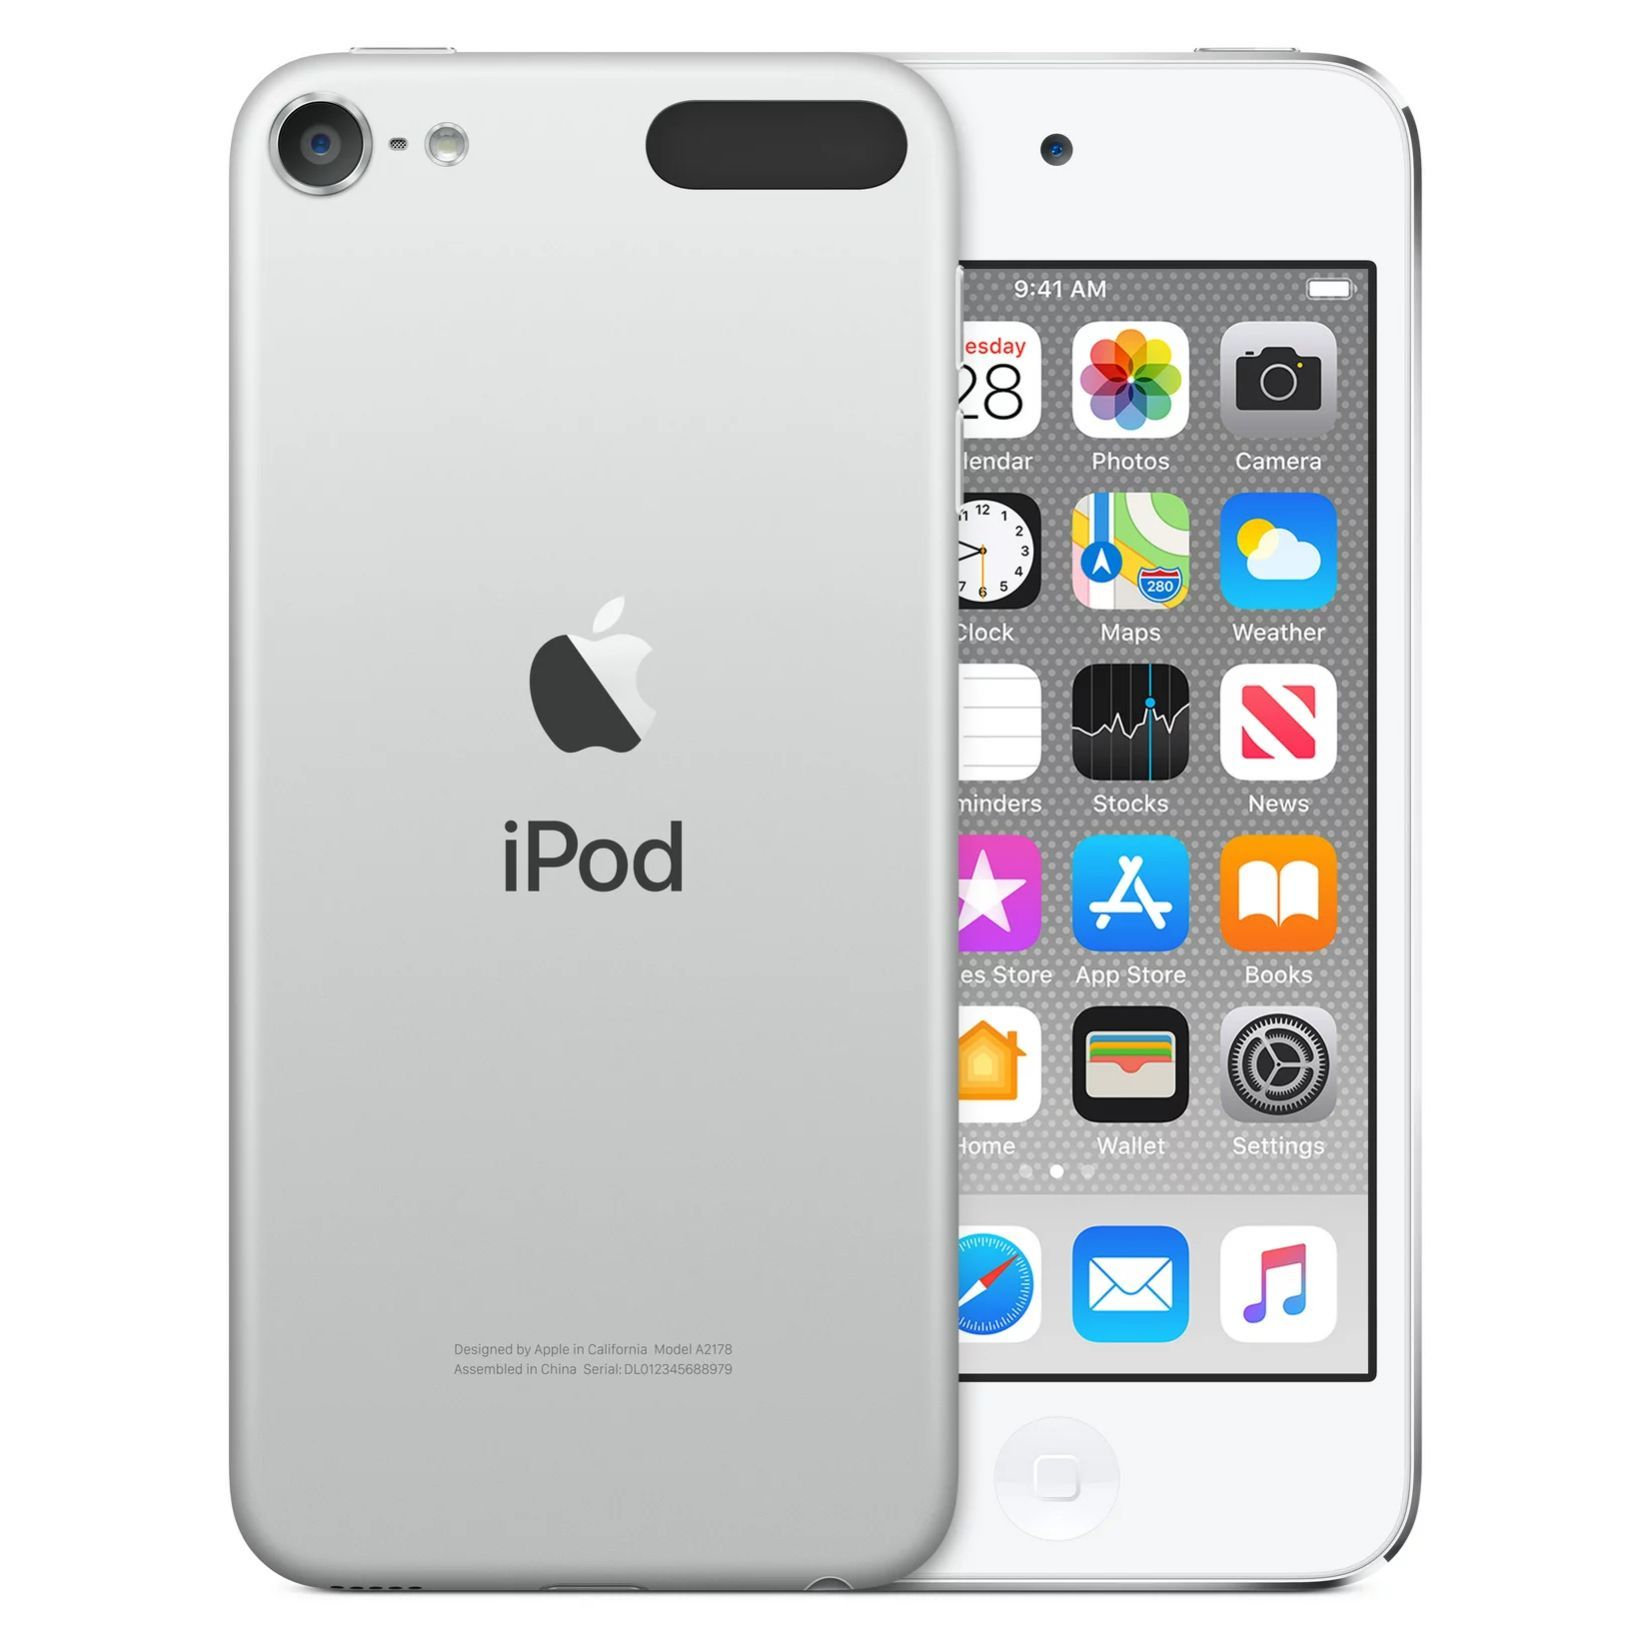 iPod touch Media Player